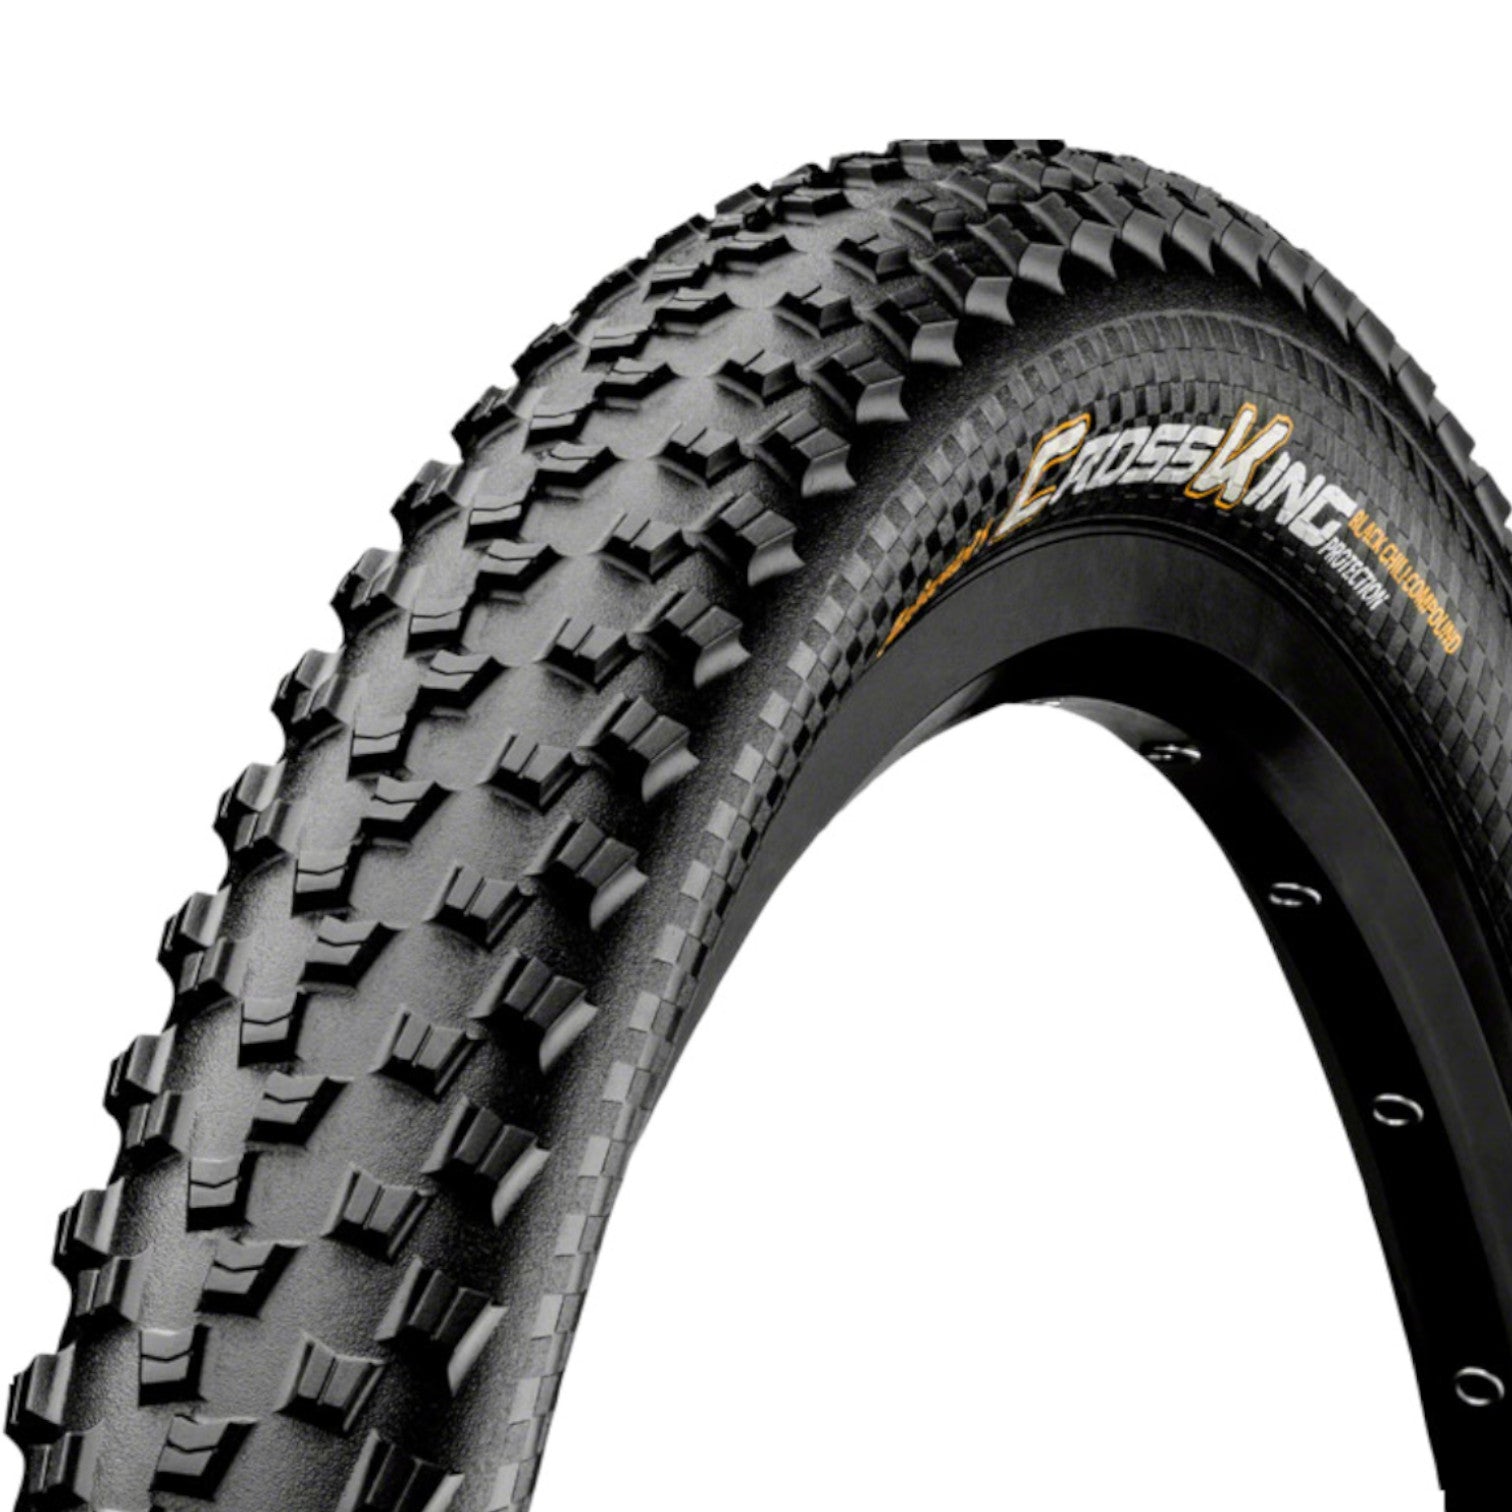 Continental Cross King 27.5-inch ProTection BlackChili Tubeless Tire